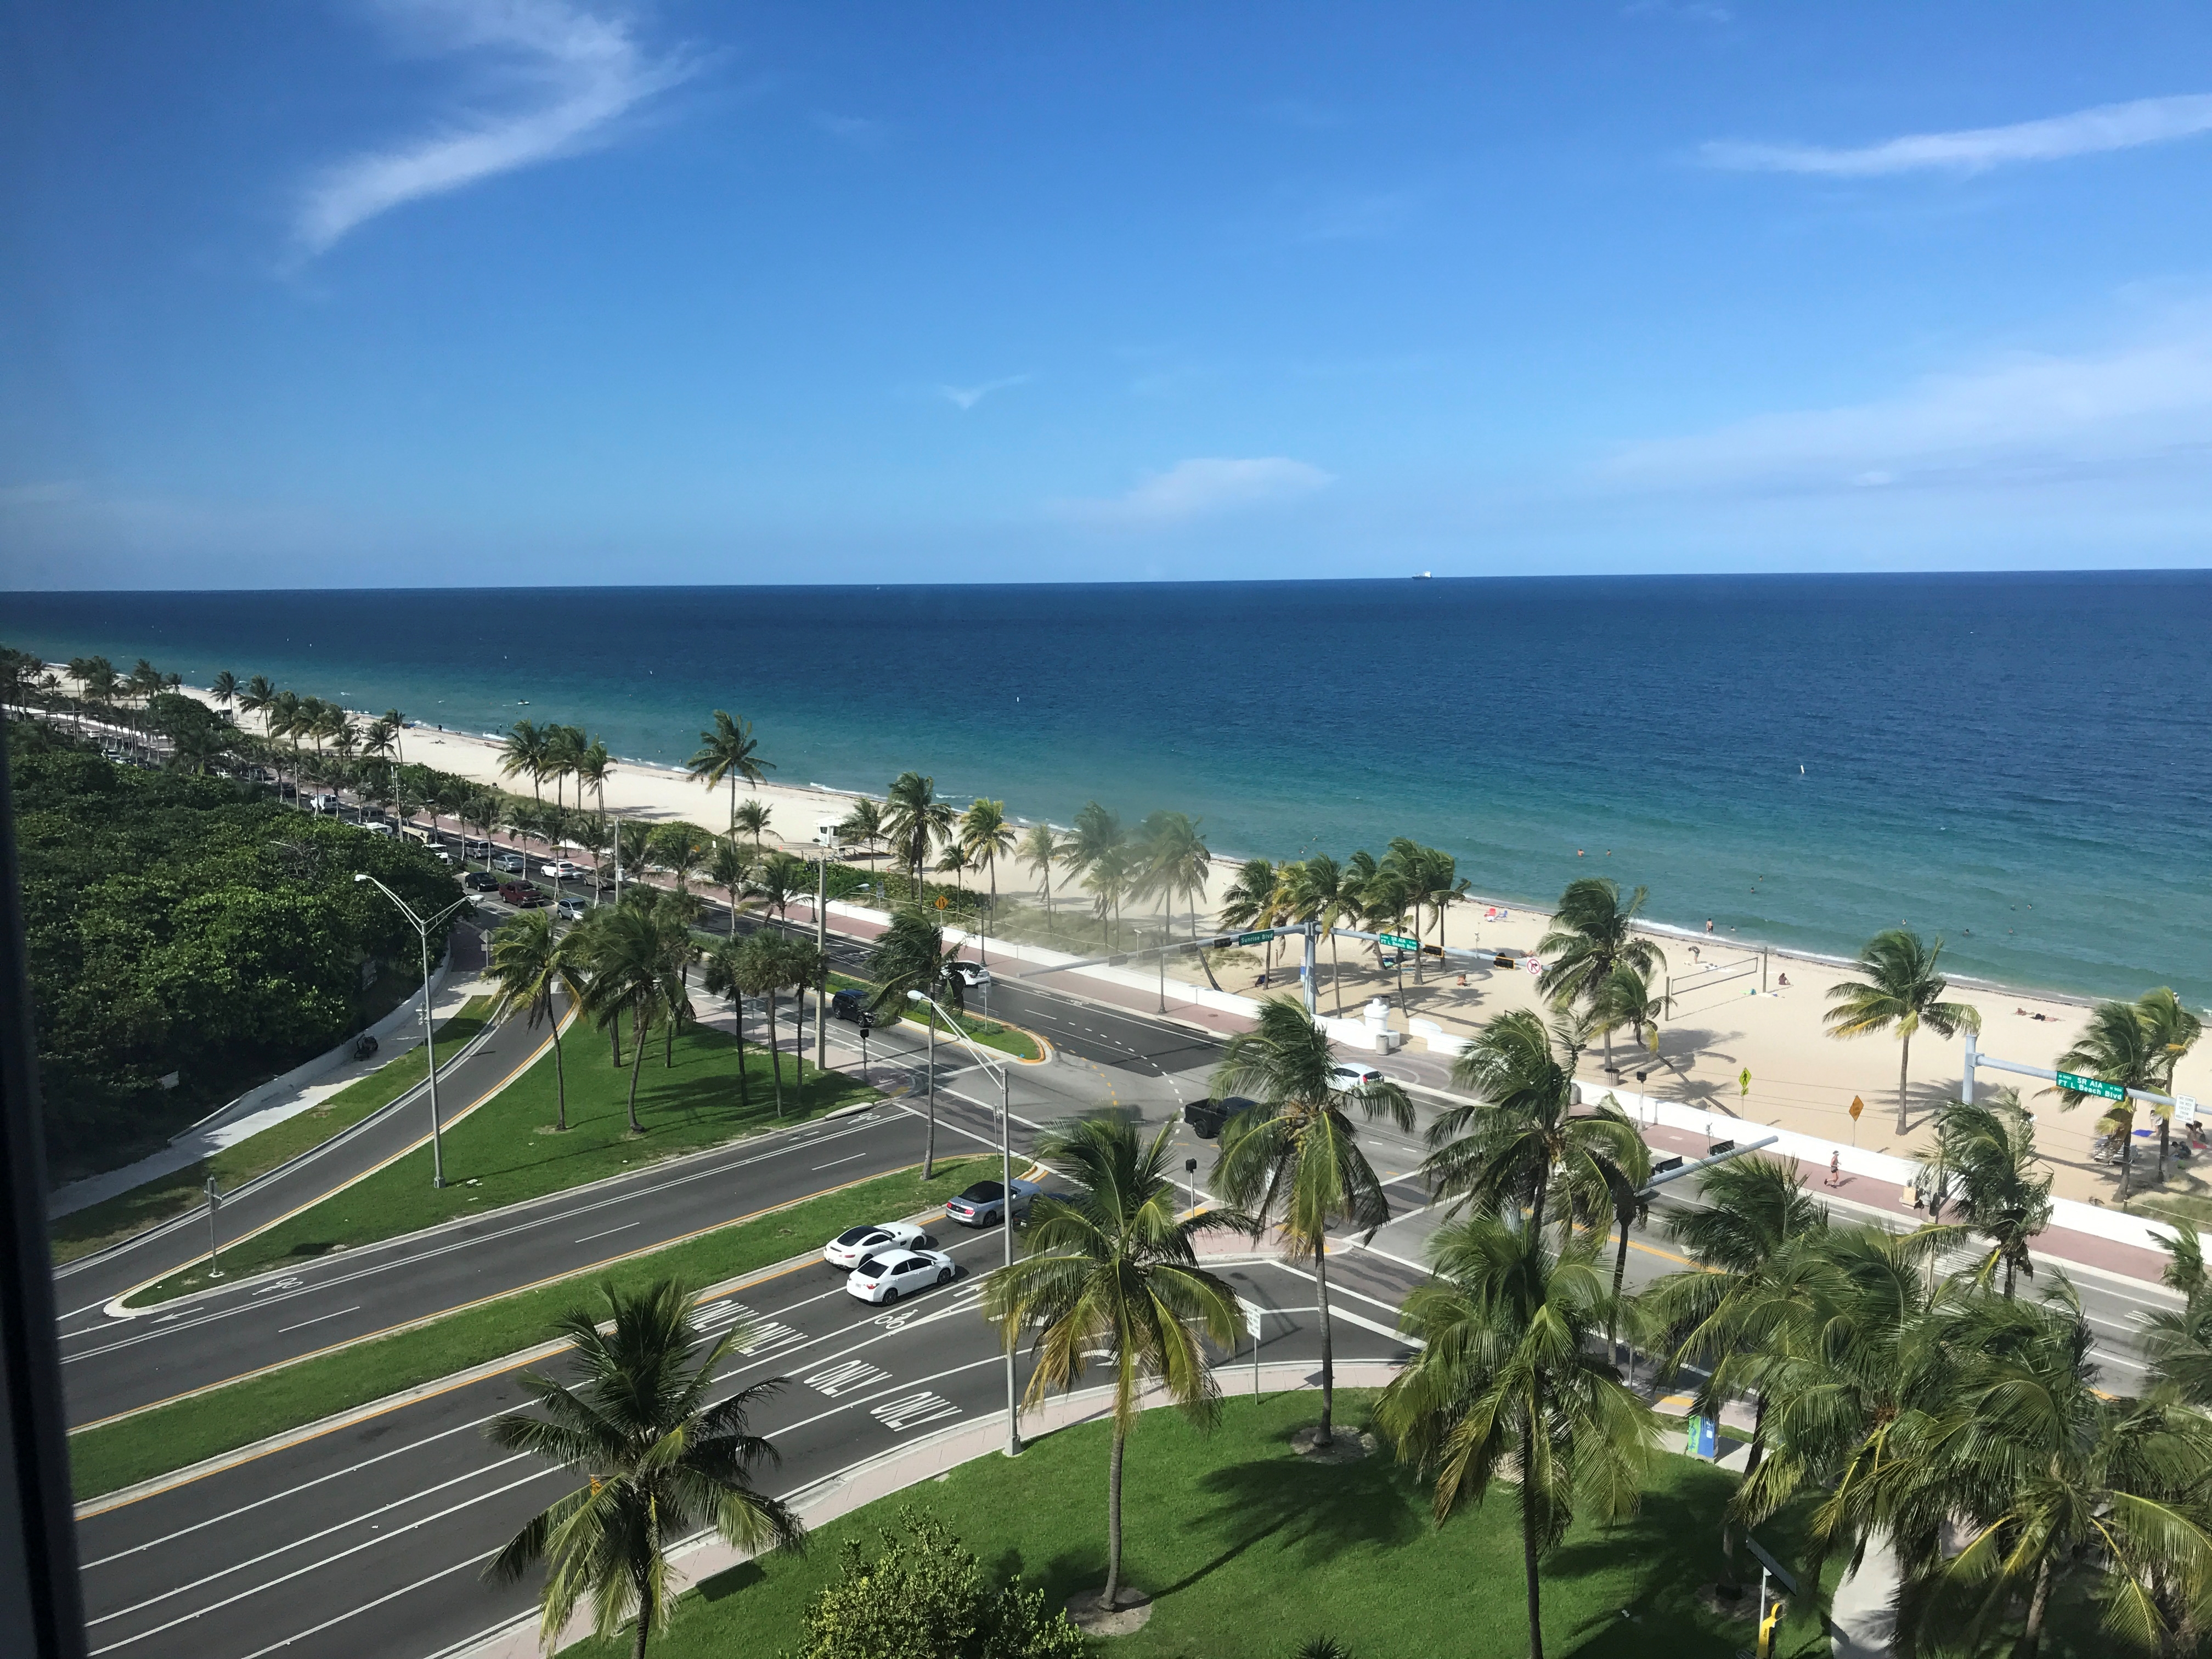 Fort Lauderdale Staycation - Staycation Ideas: The Best U.S. Cities to Visit - Bob Vila